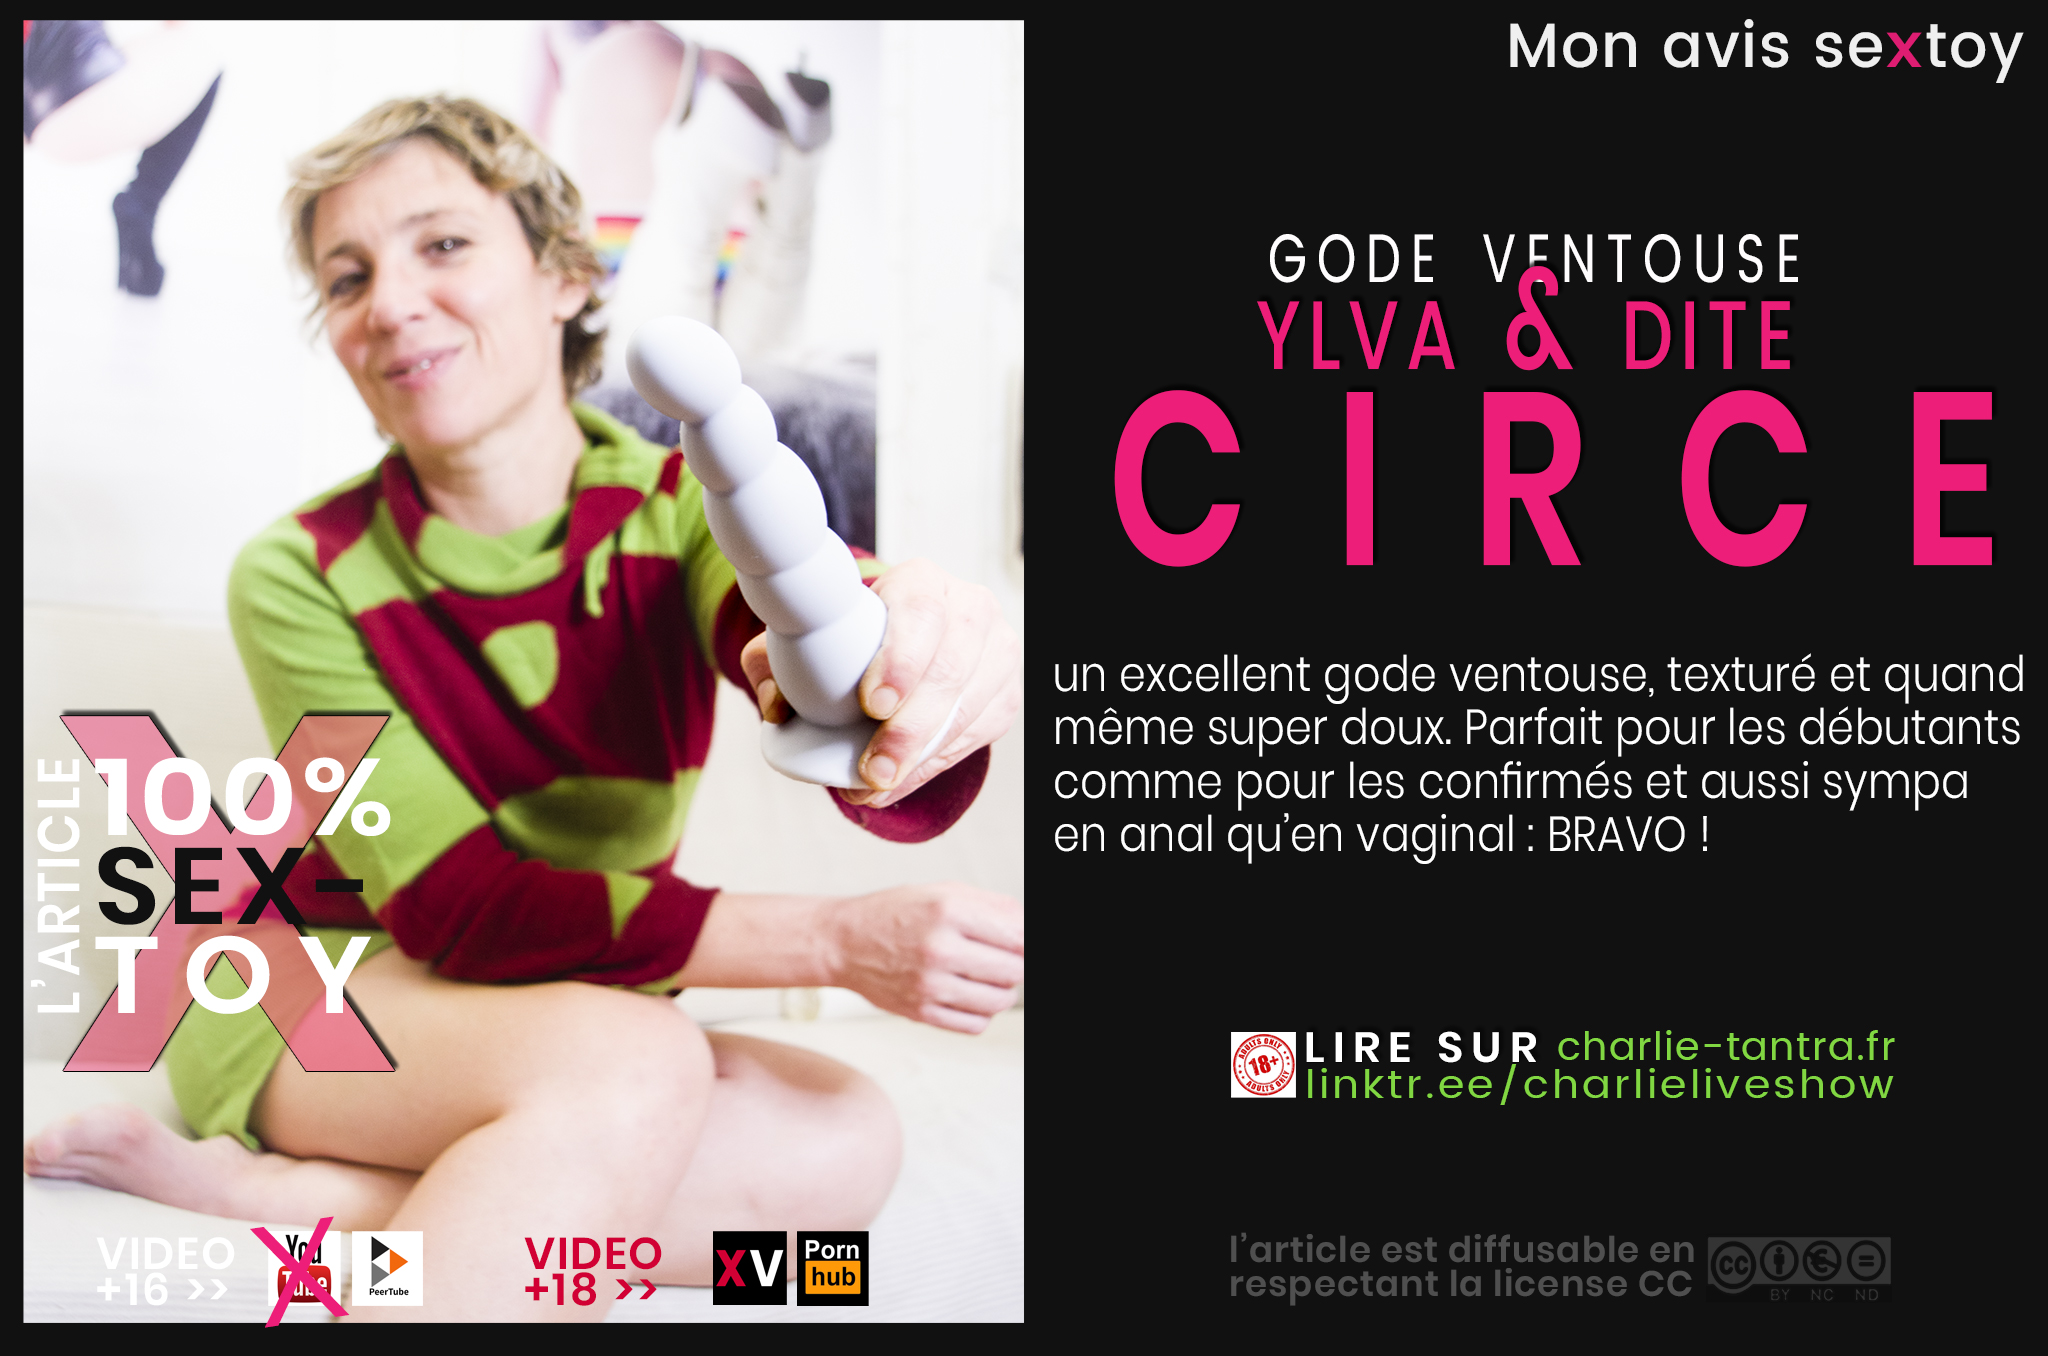 You are currently viewing Sextoy multi usage CIRCE de Ylva & Dite. le couteau suisse